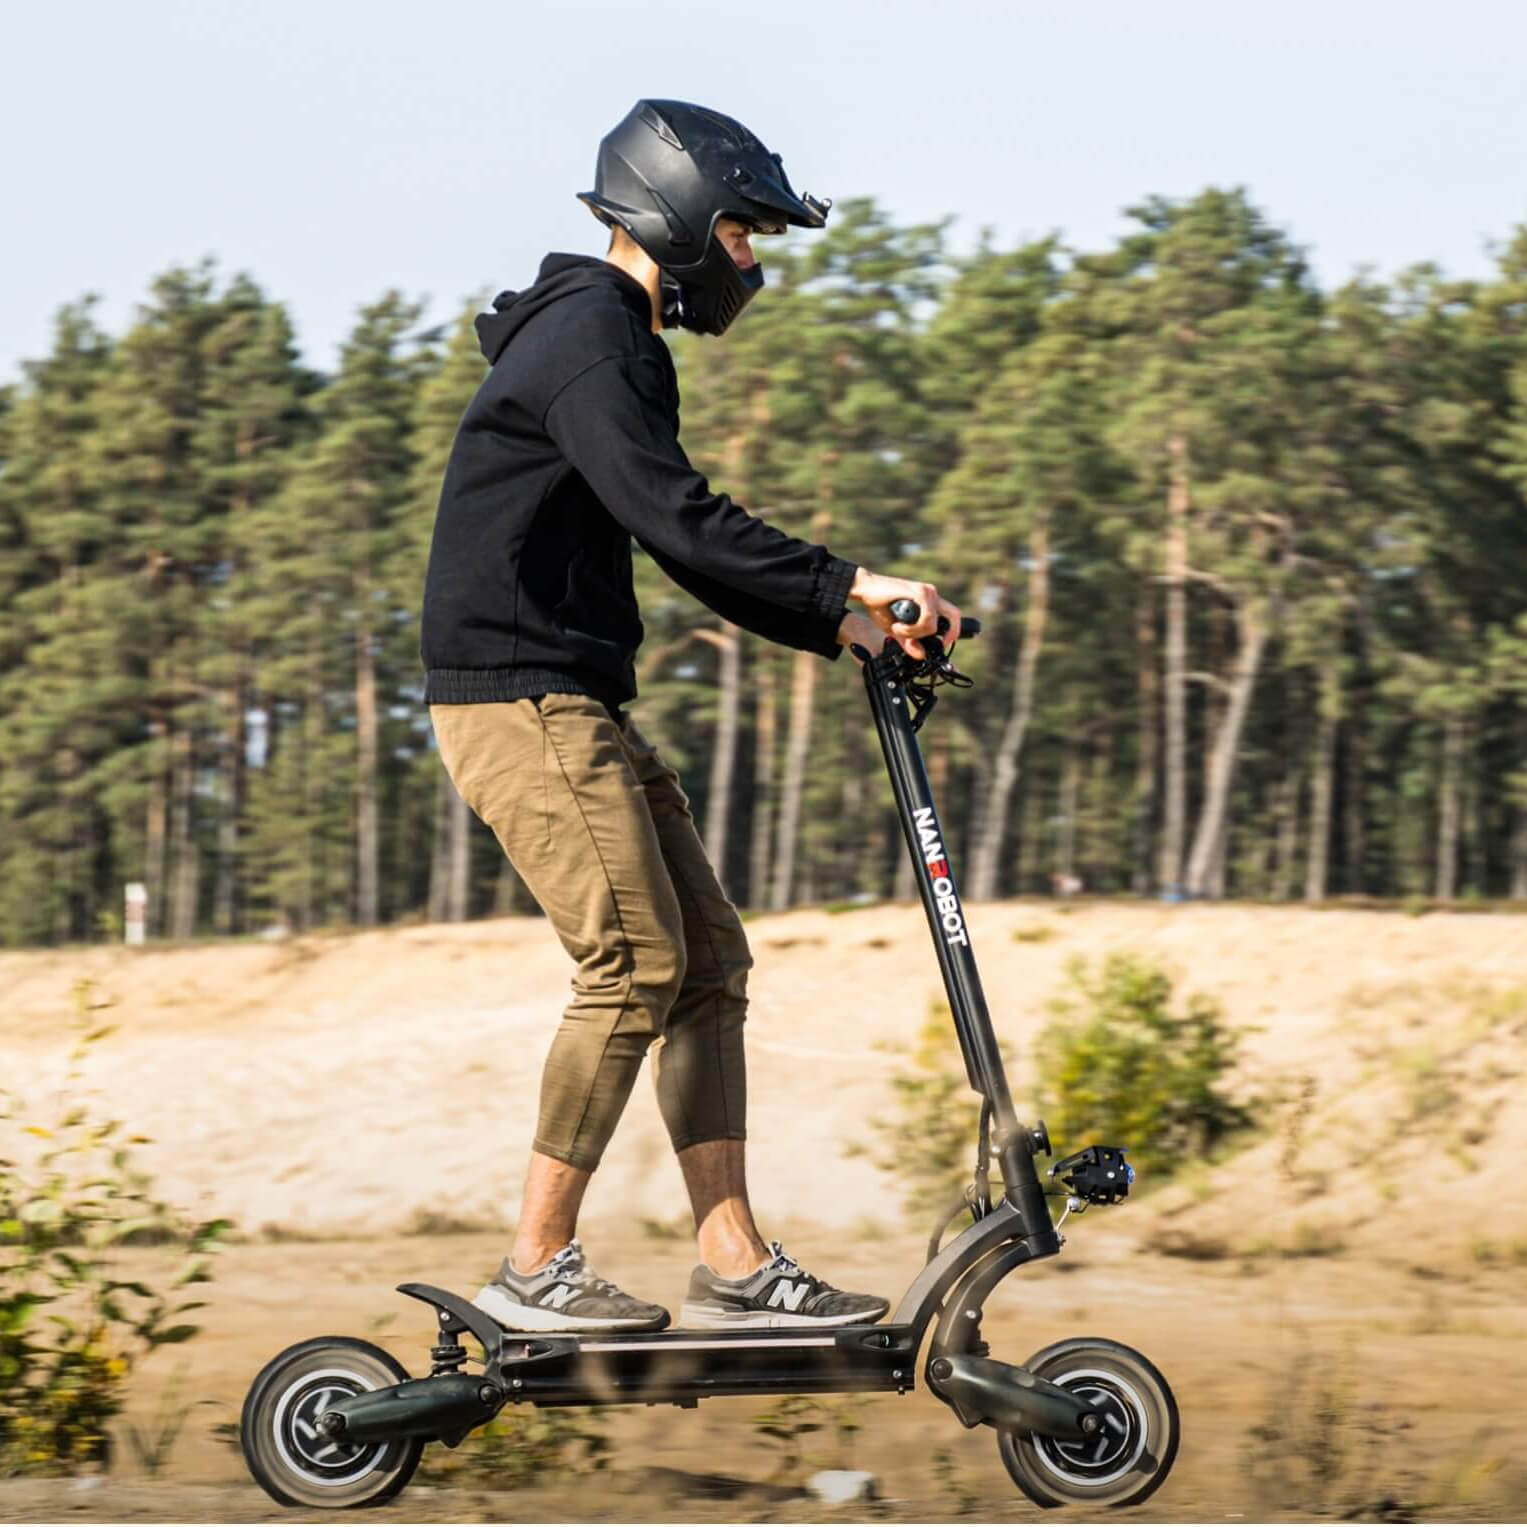 5 Reasons Why E-Scooters Are Actually Good For The Environment